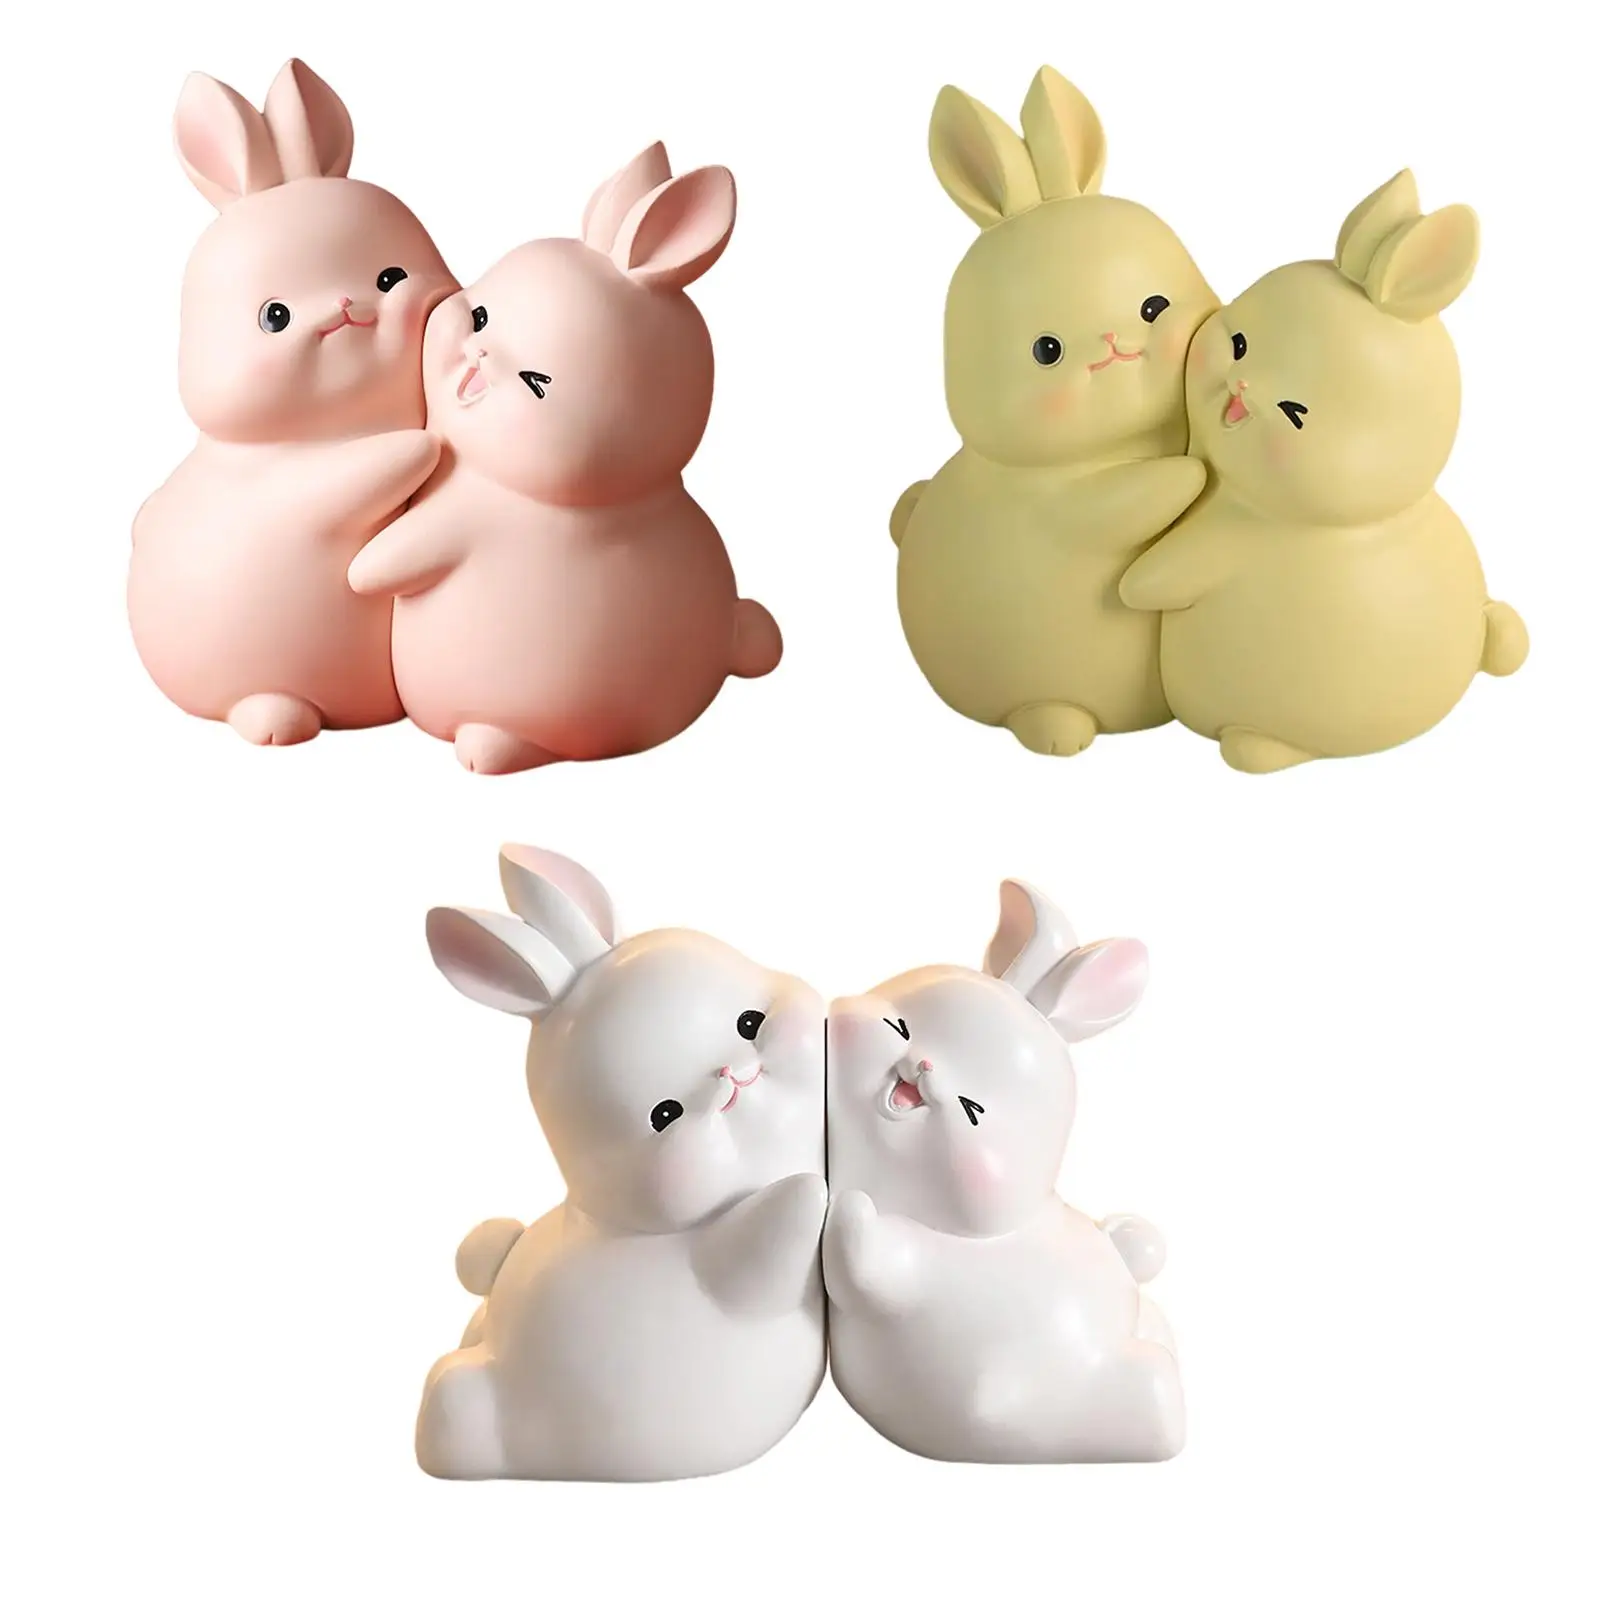 Rabbit Bookends Bunny Book Ends Cute Modern Statues Sculptures Decorative Bookends for Shelves Home Cabinet Kids Rooms Ornaments